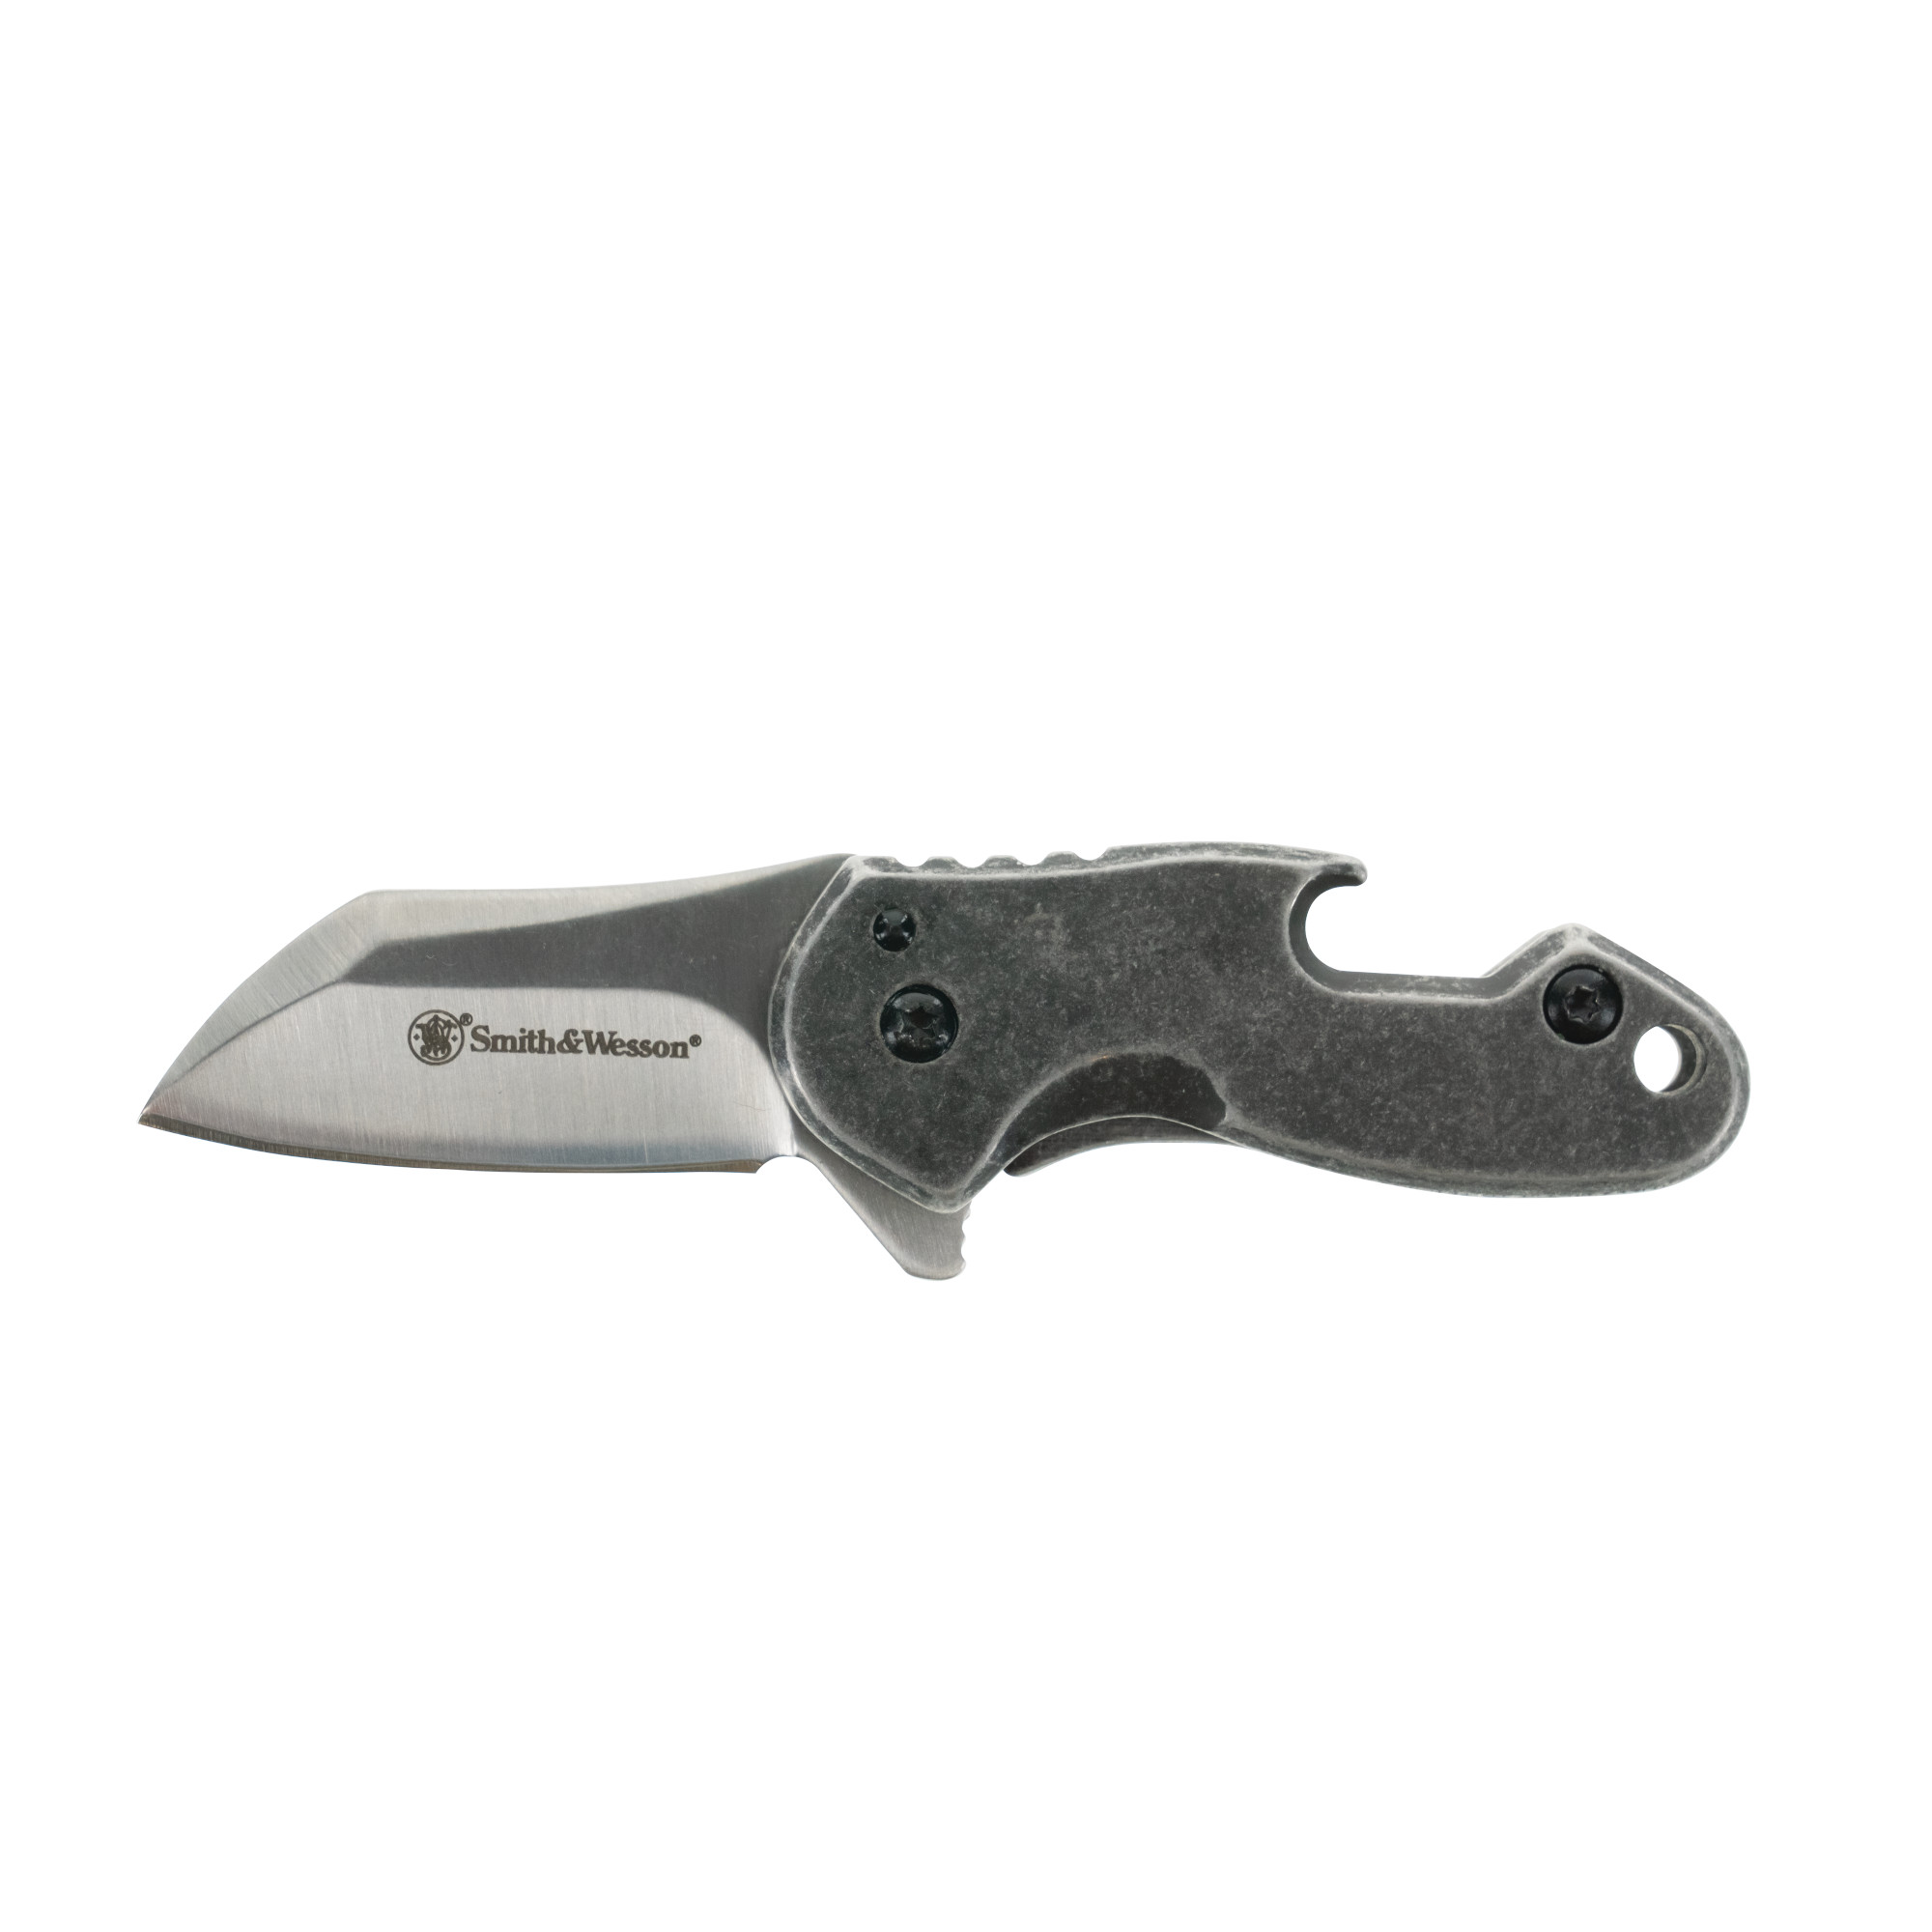 https://store.smith-wesson.com/on/demandware.static/-/Sites-smithwesson-master/default/dw8b19d7b8/images/1117229/1117229%20Drive%20folding%20knife_Top_2020.jpg